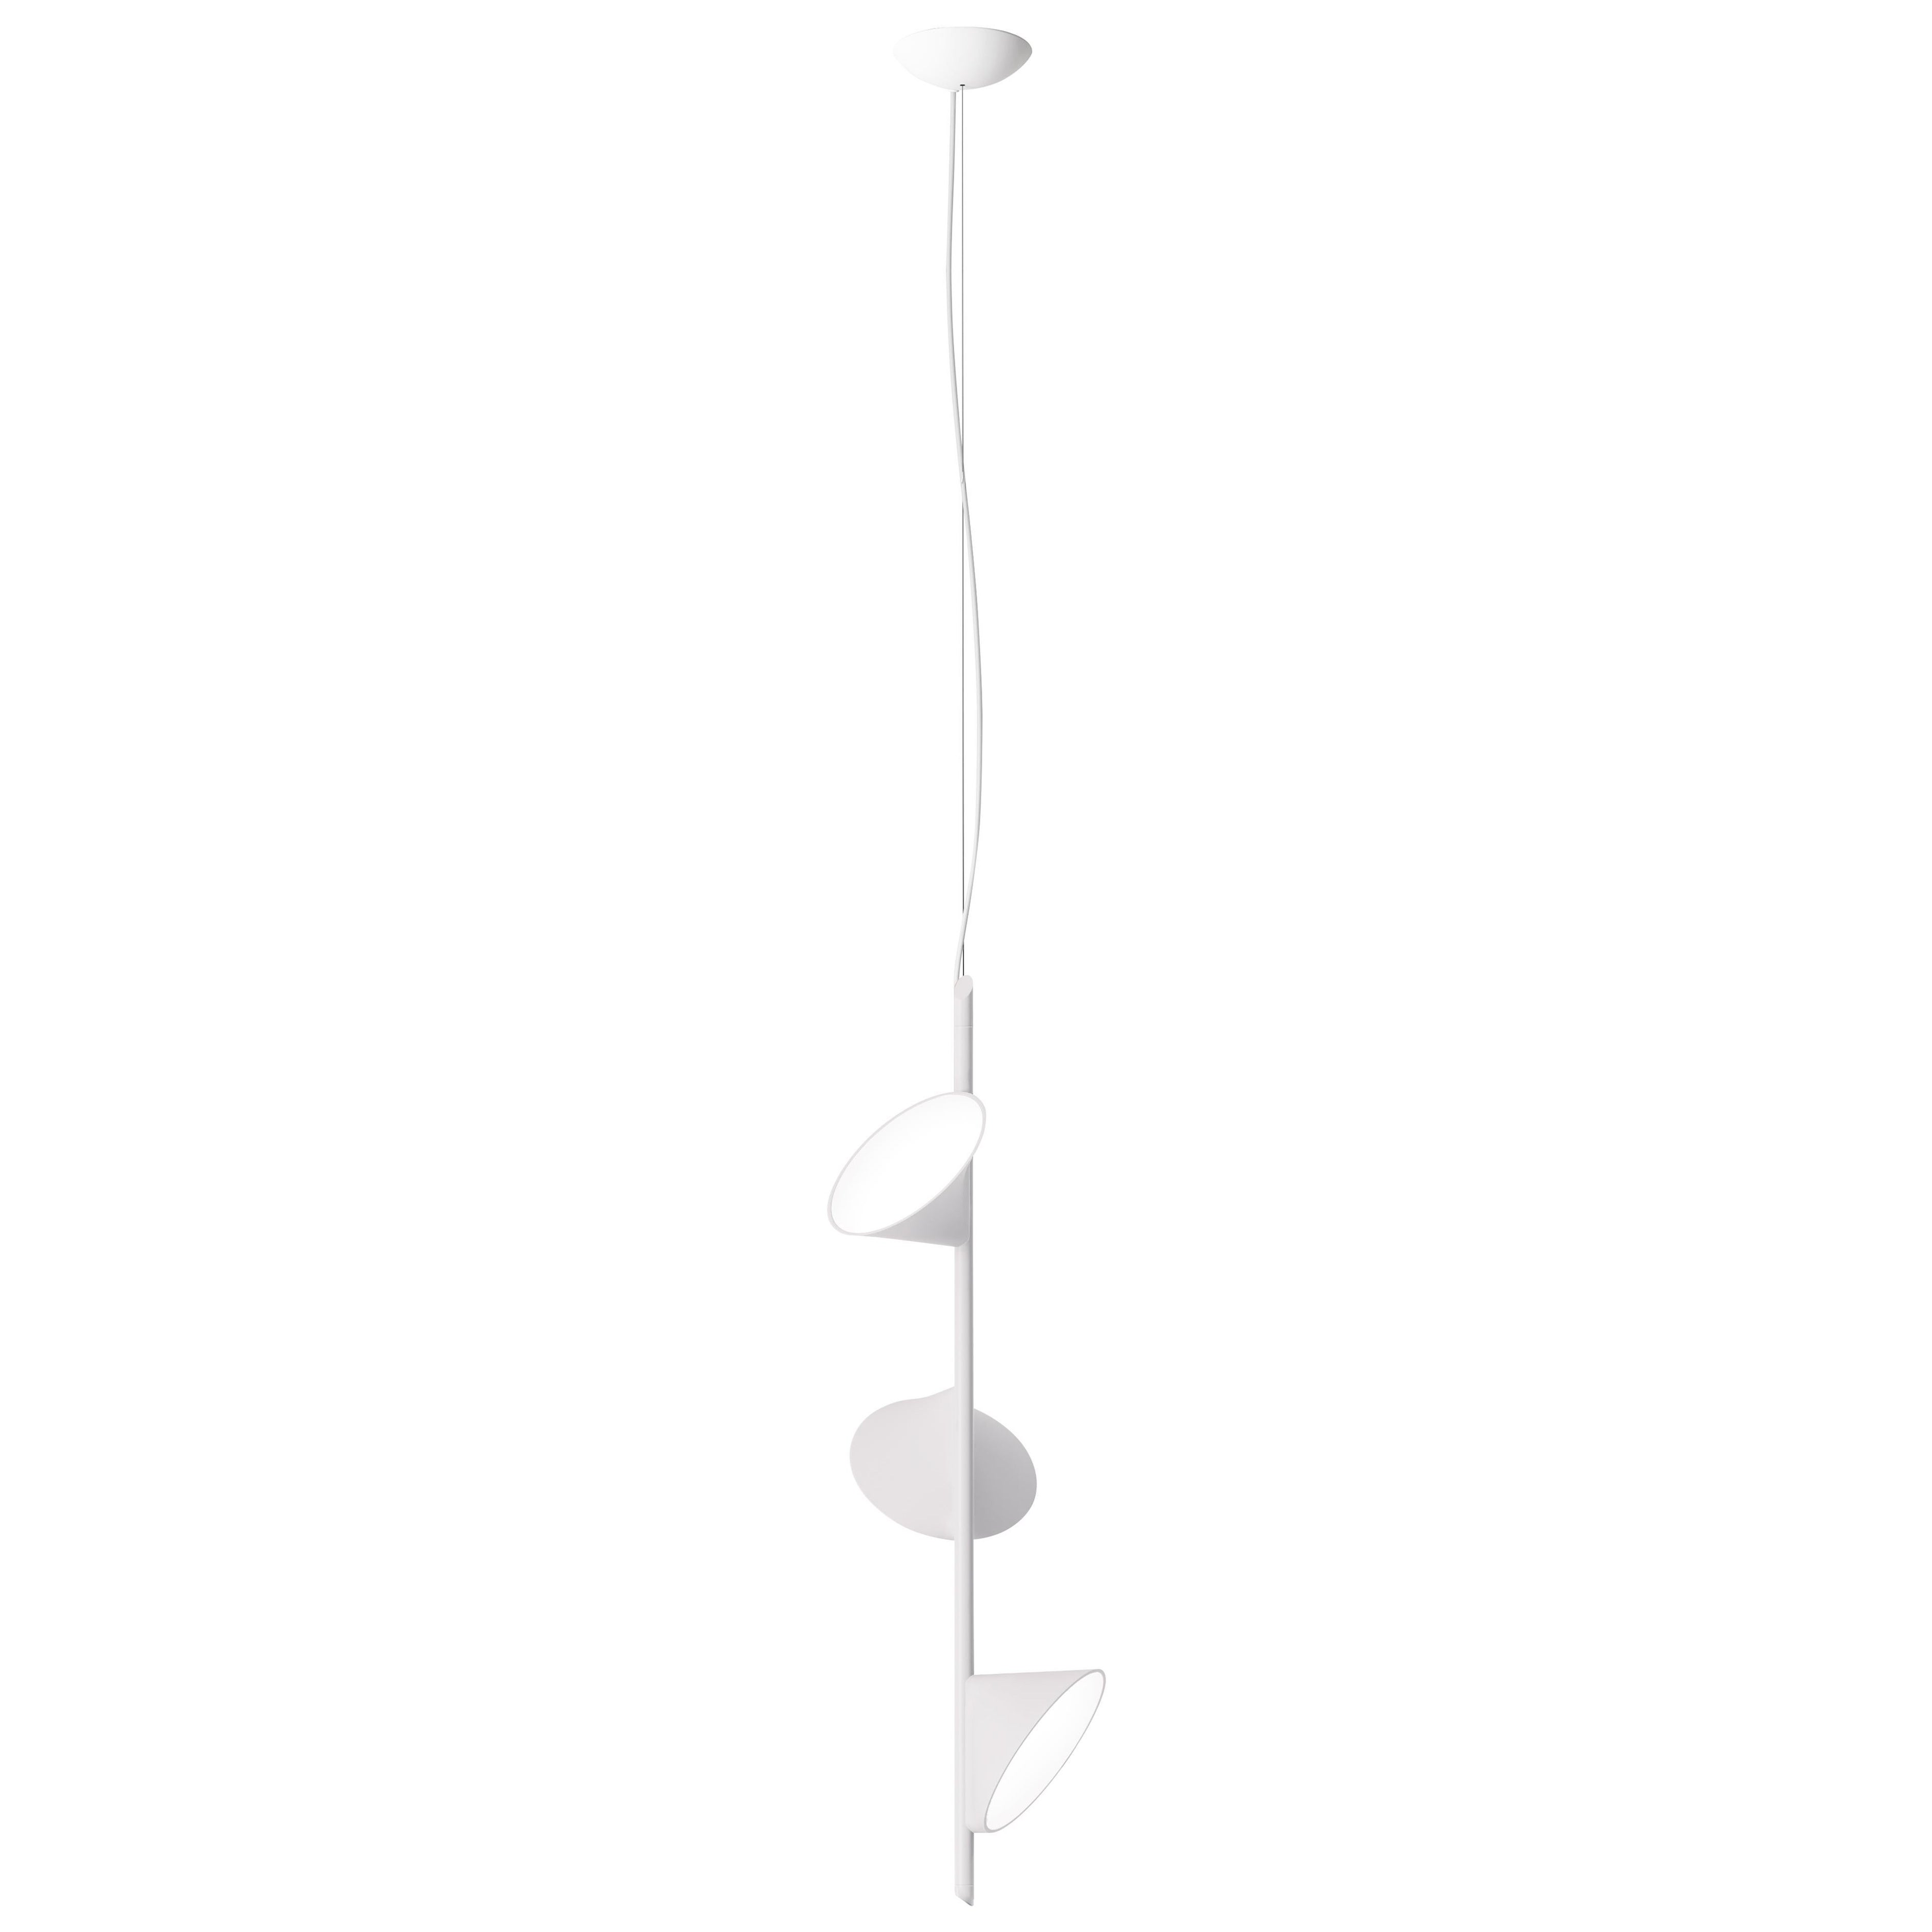 Axolight Orchid 3 Light Pendant Lamp with Aluminum Body in White byRainer Mutsch For Sale